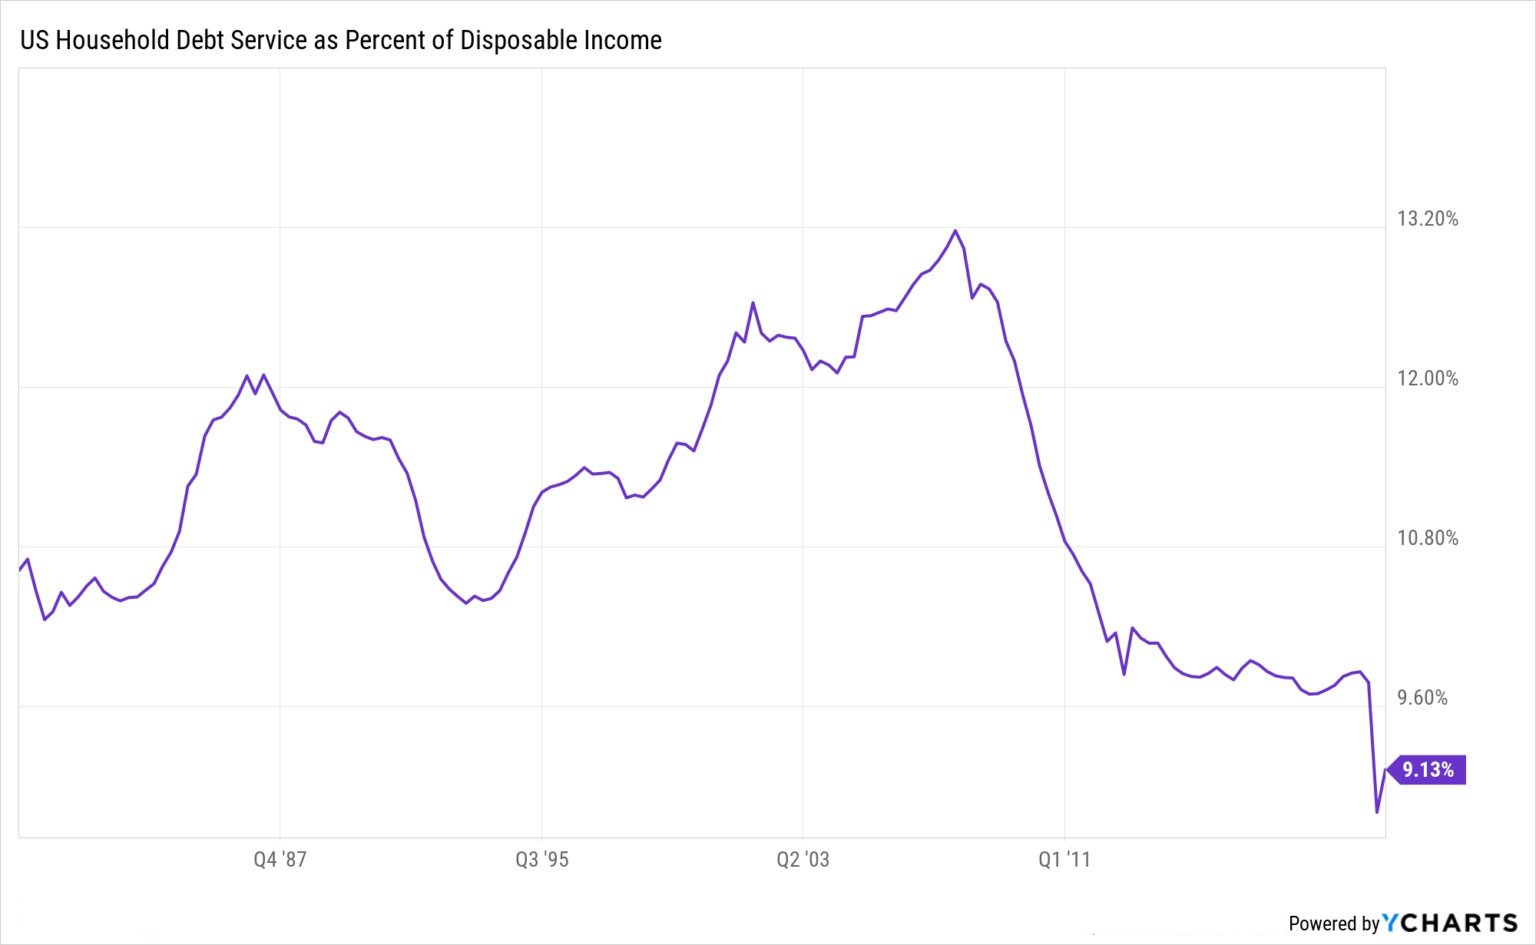 Debt as a percentage of disposable income